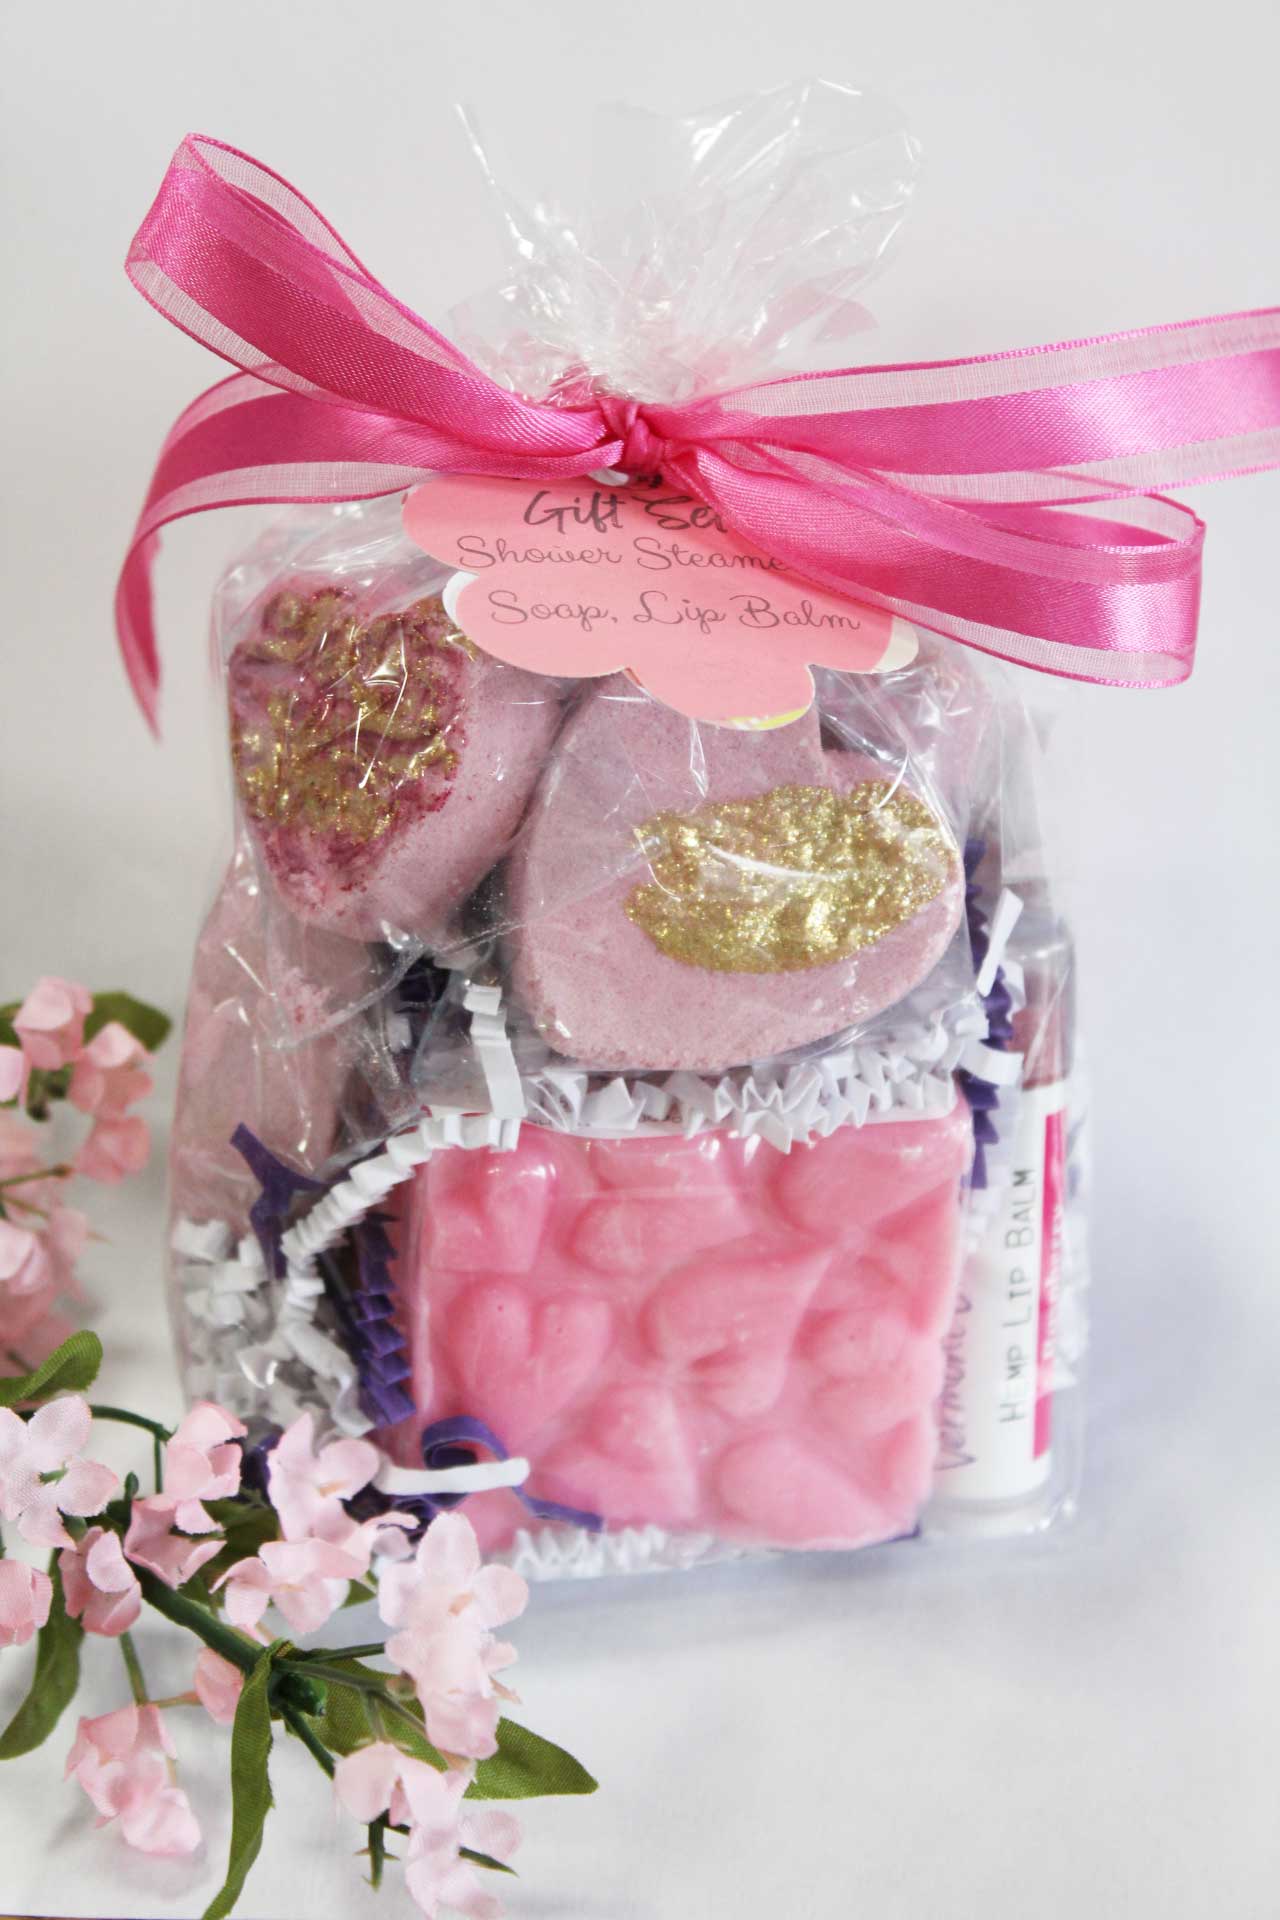 Shower steamer gift bag with soap and raspberry lip balm